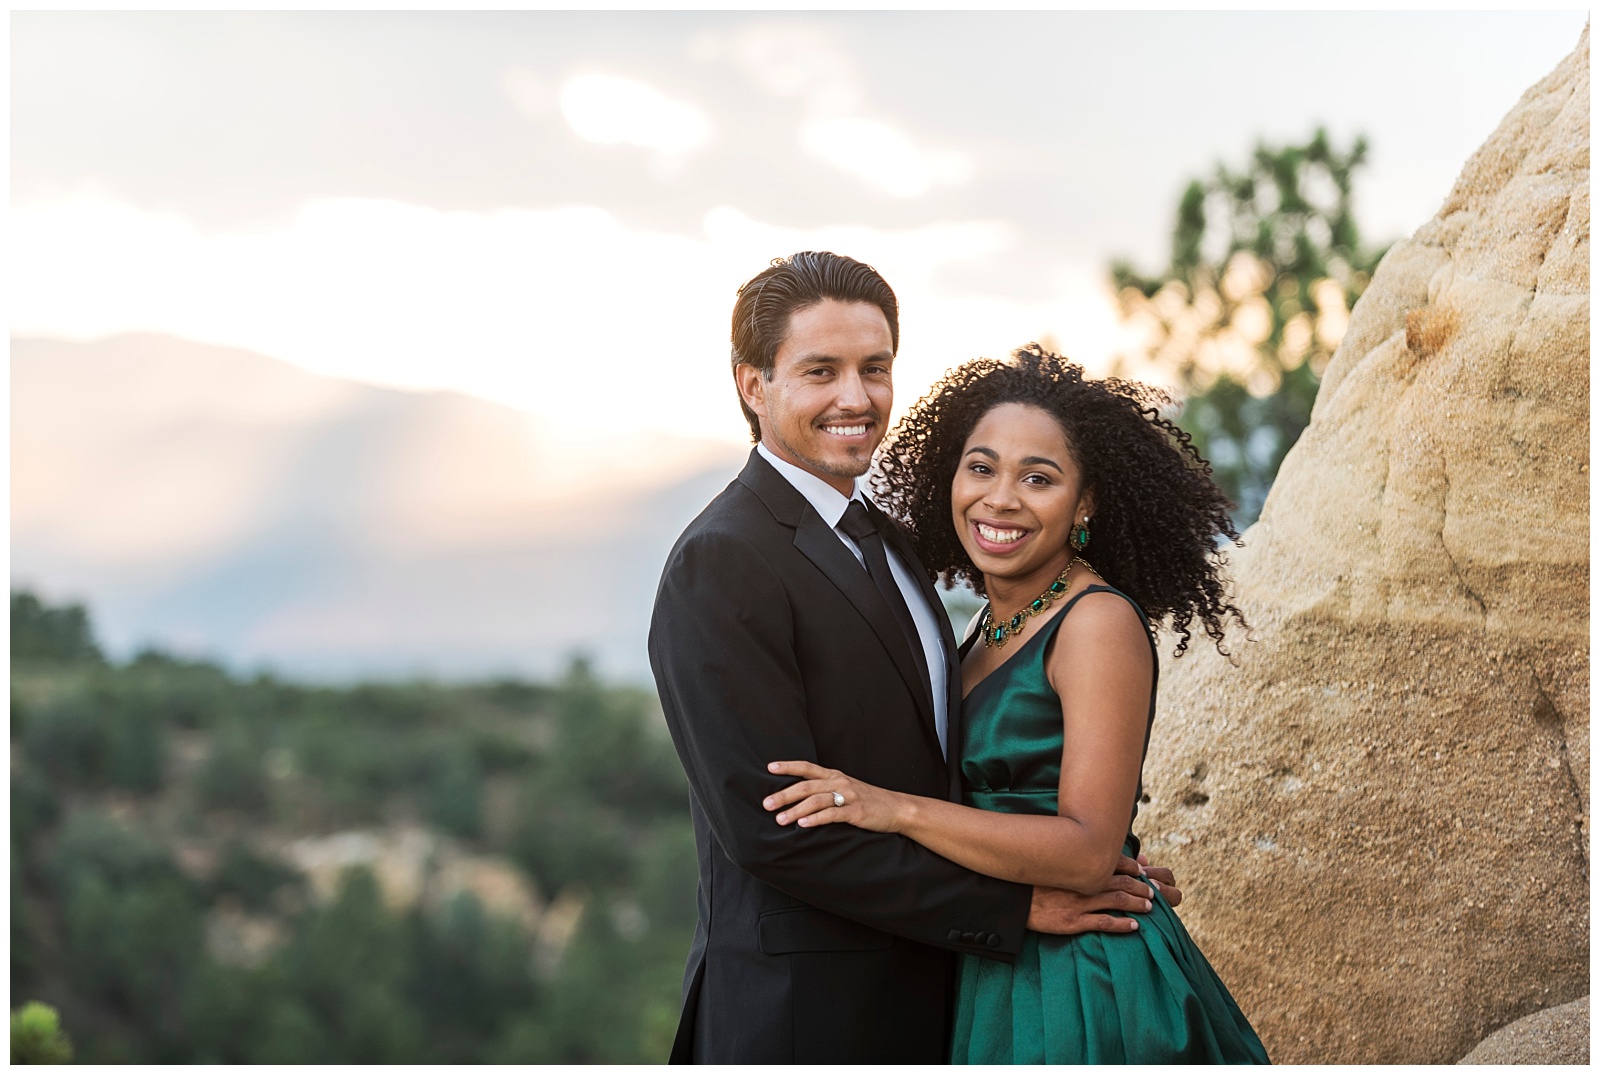 Couple standing and embracing with lovely mountain views behind them, they are smiling and looking at the camera